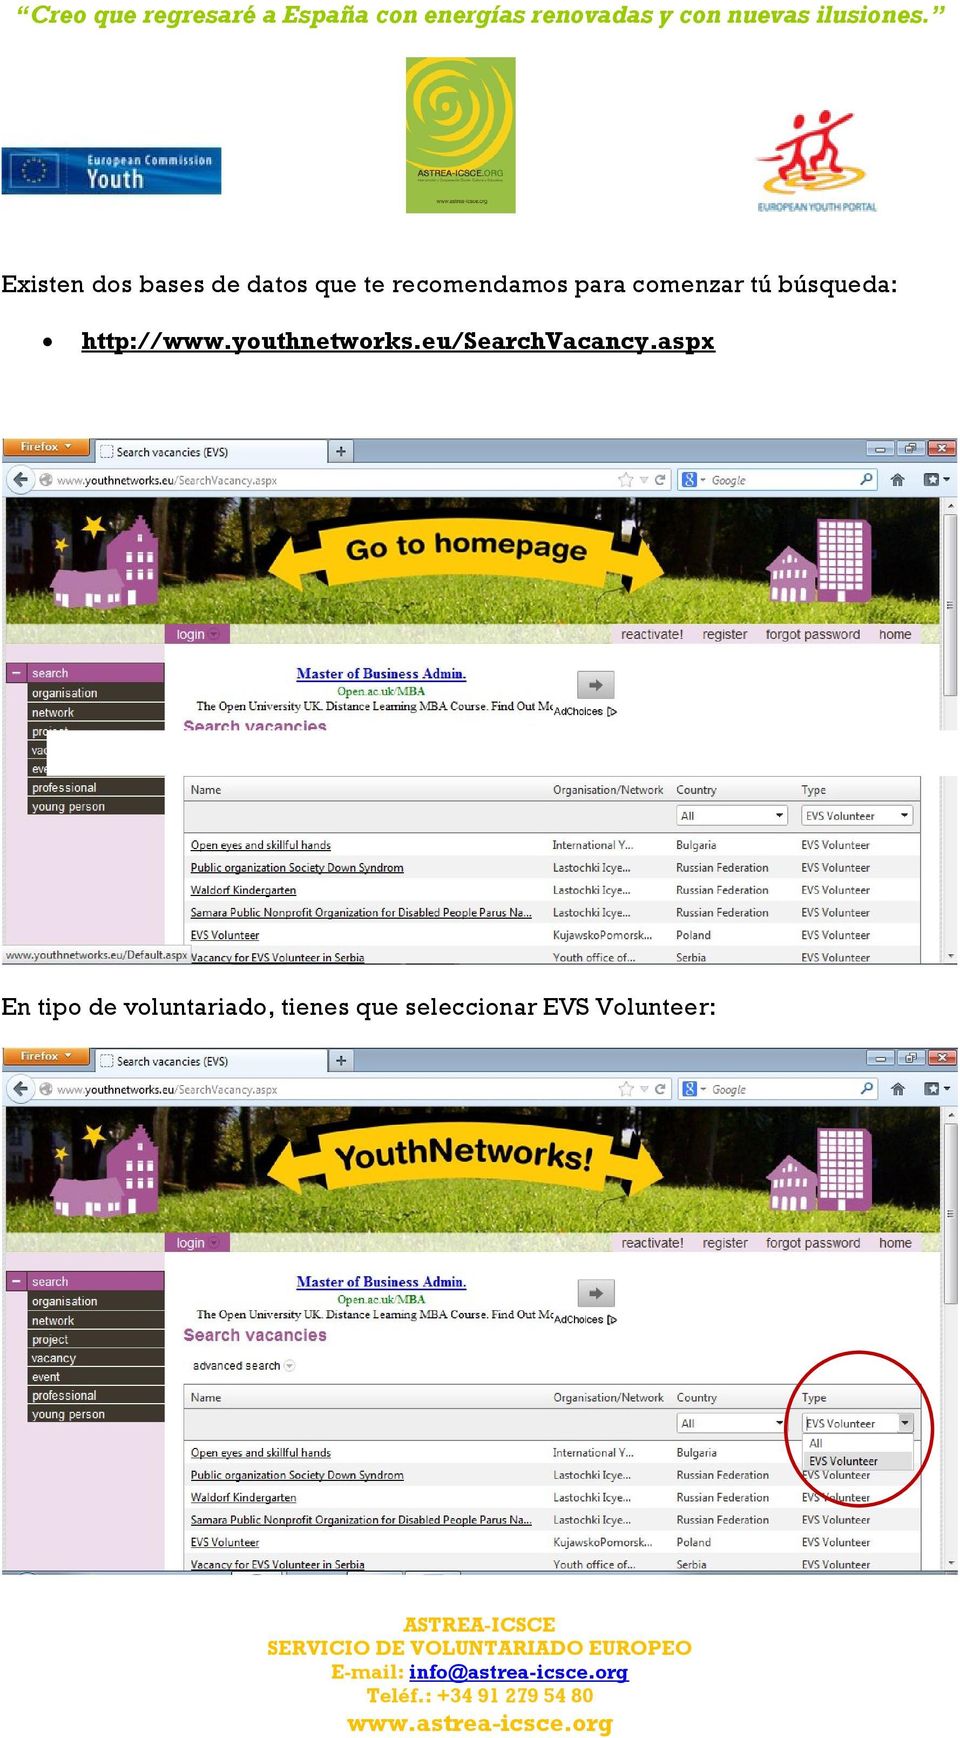 http://www.youthnetworks.eu/searchvacancy.